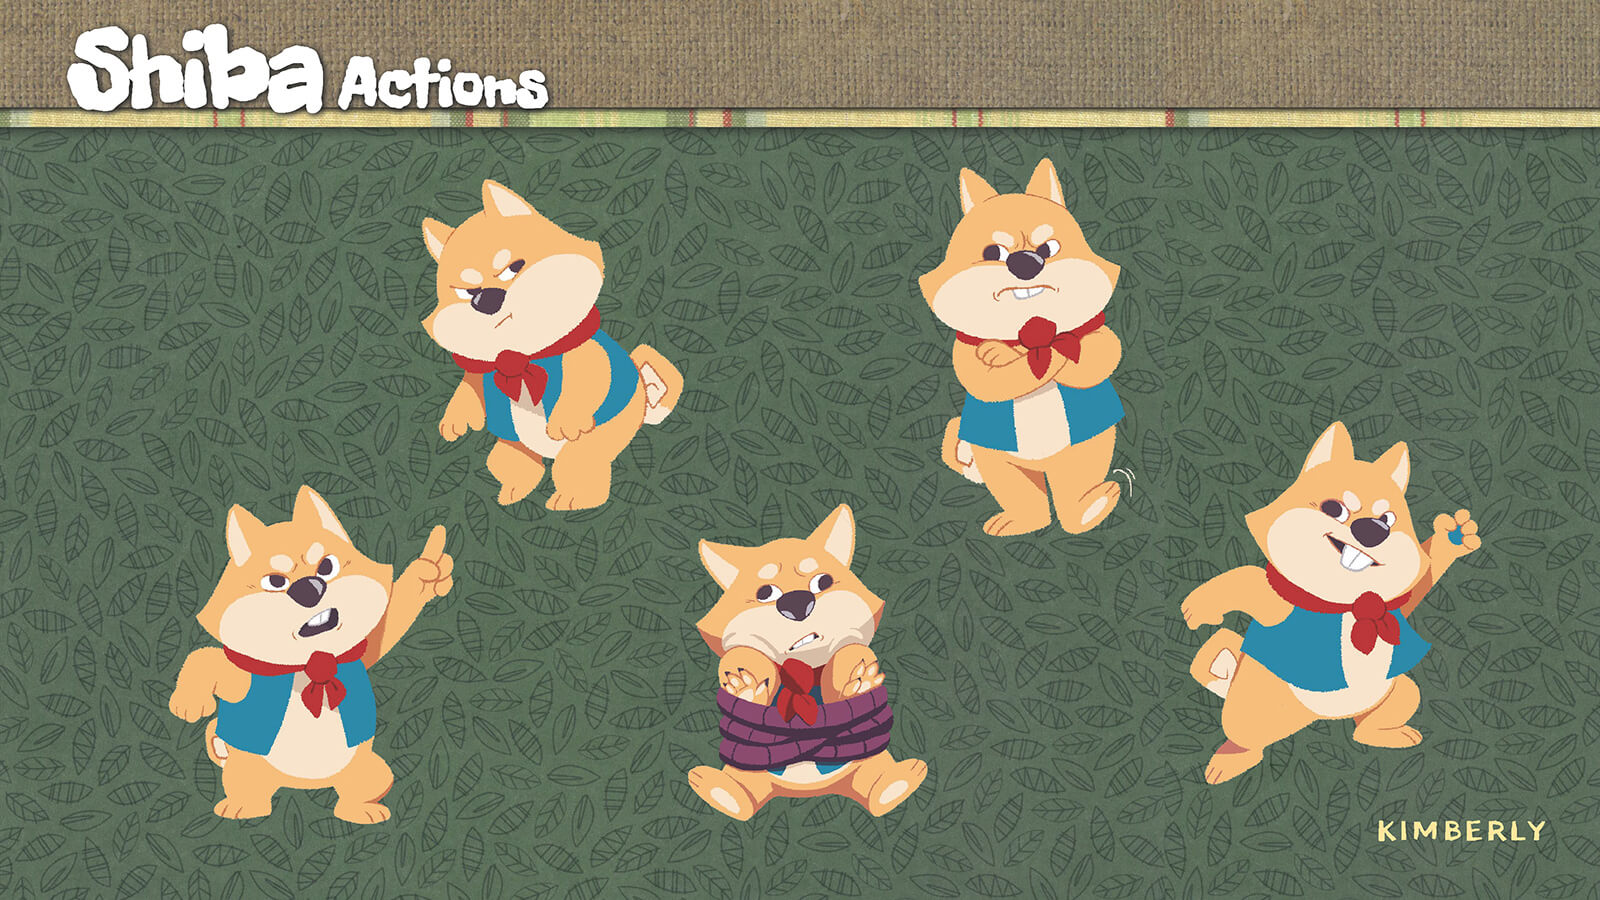 Sketches and examples of actions by the character Shiba.